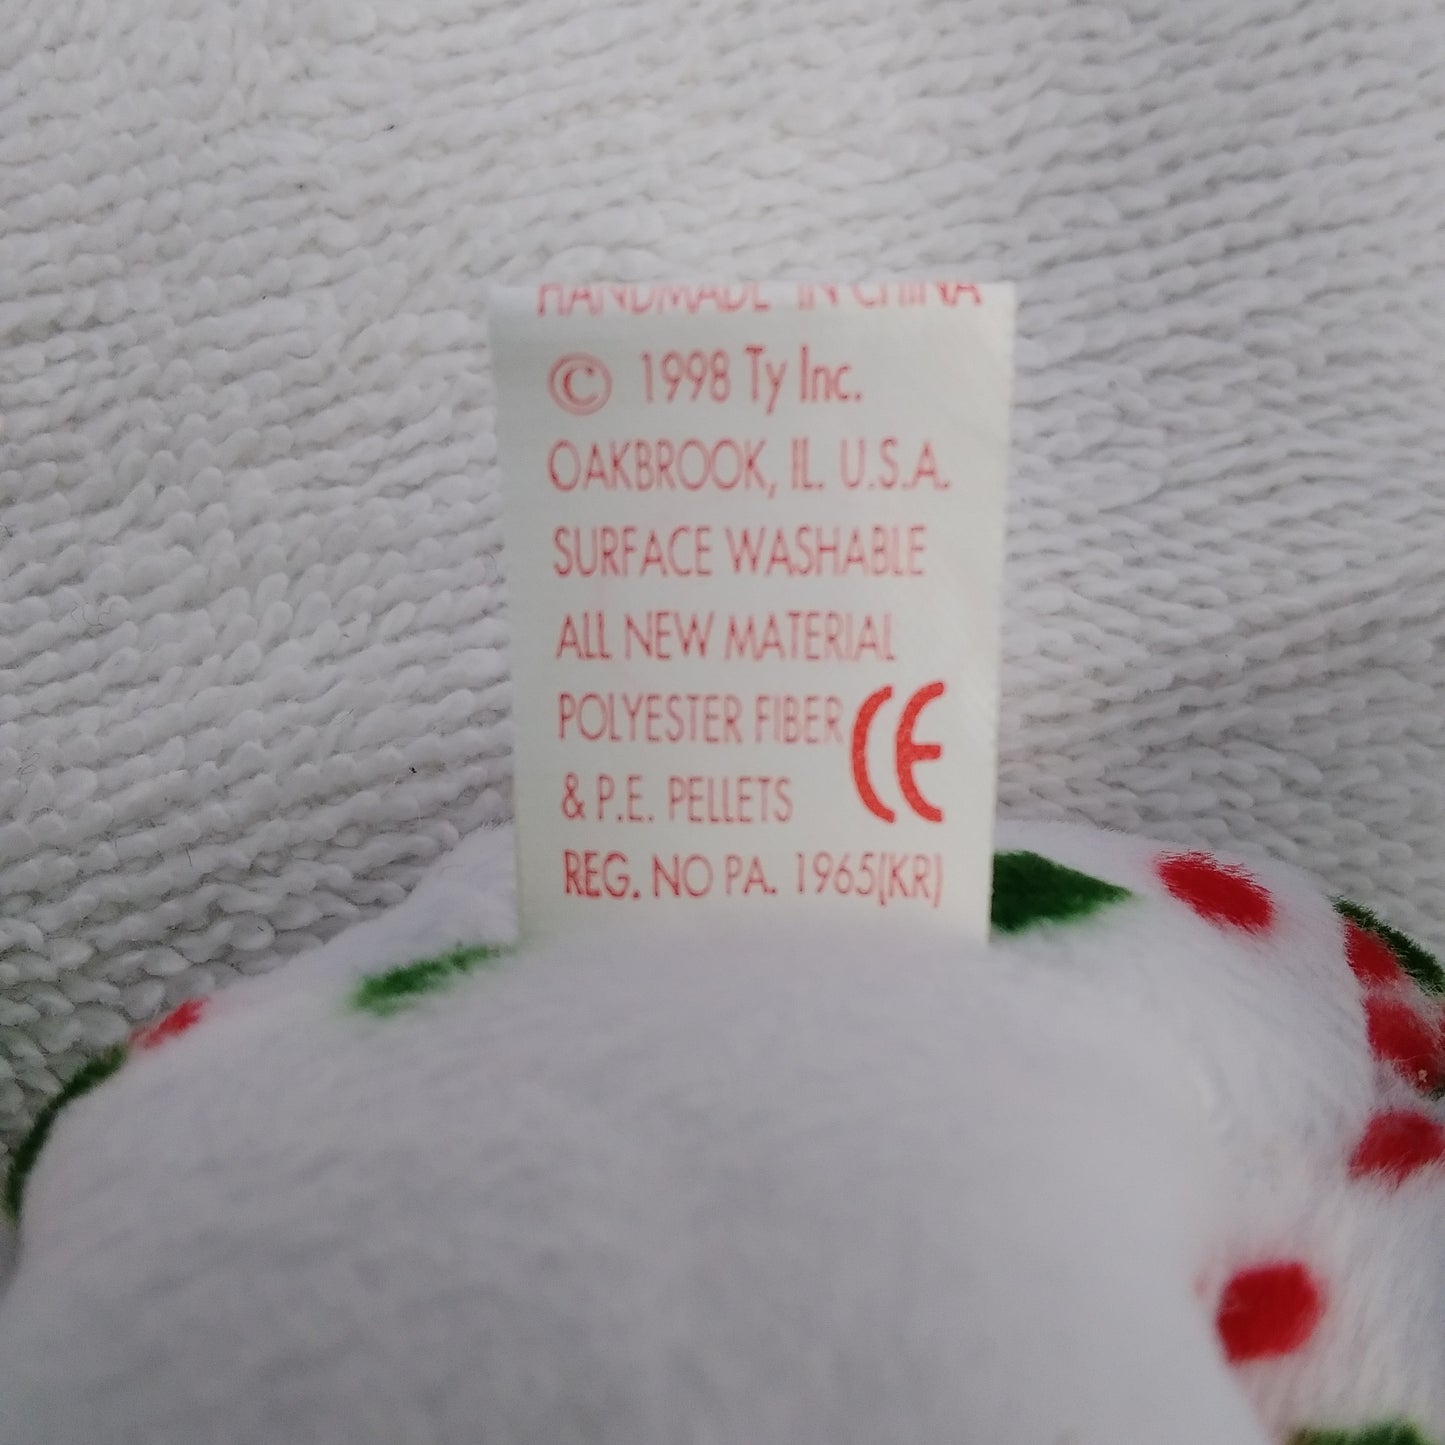 Ty Beanie Baby 1998 Holiday Bear with Tag sealed in Protective Case